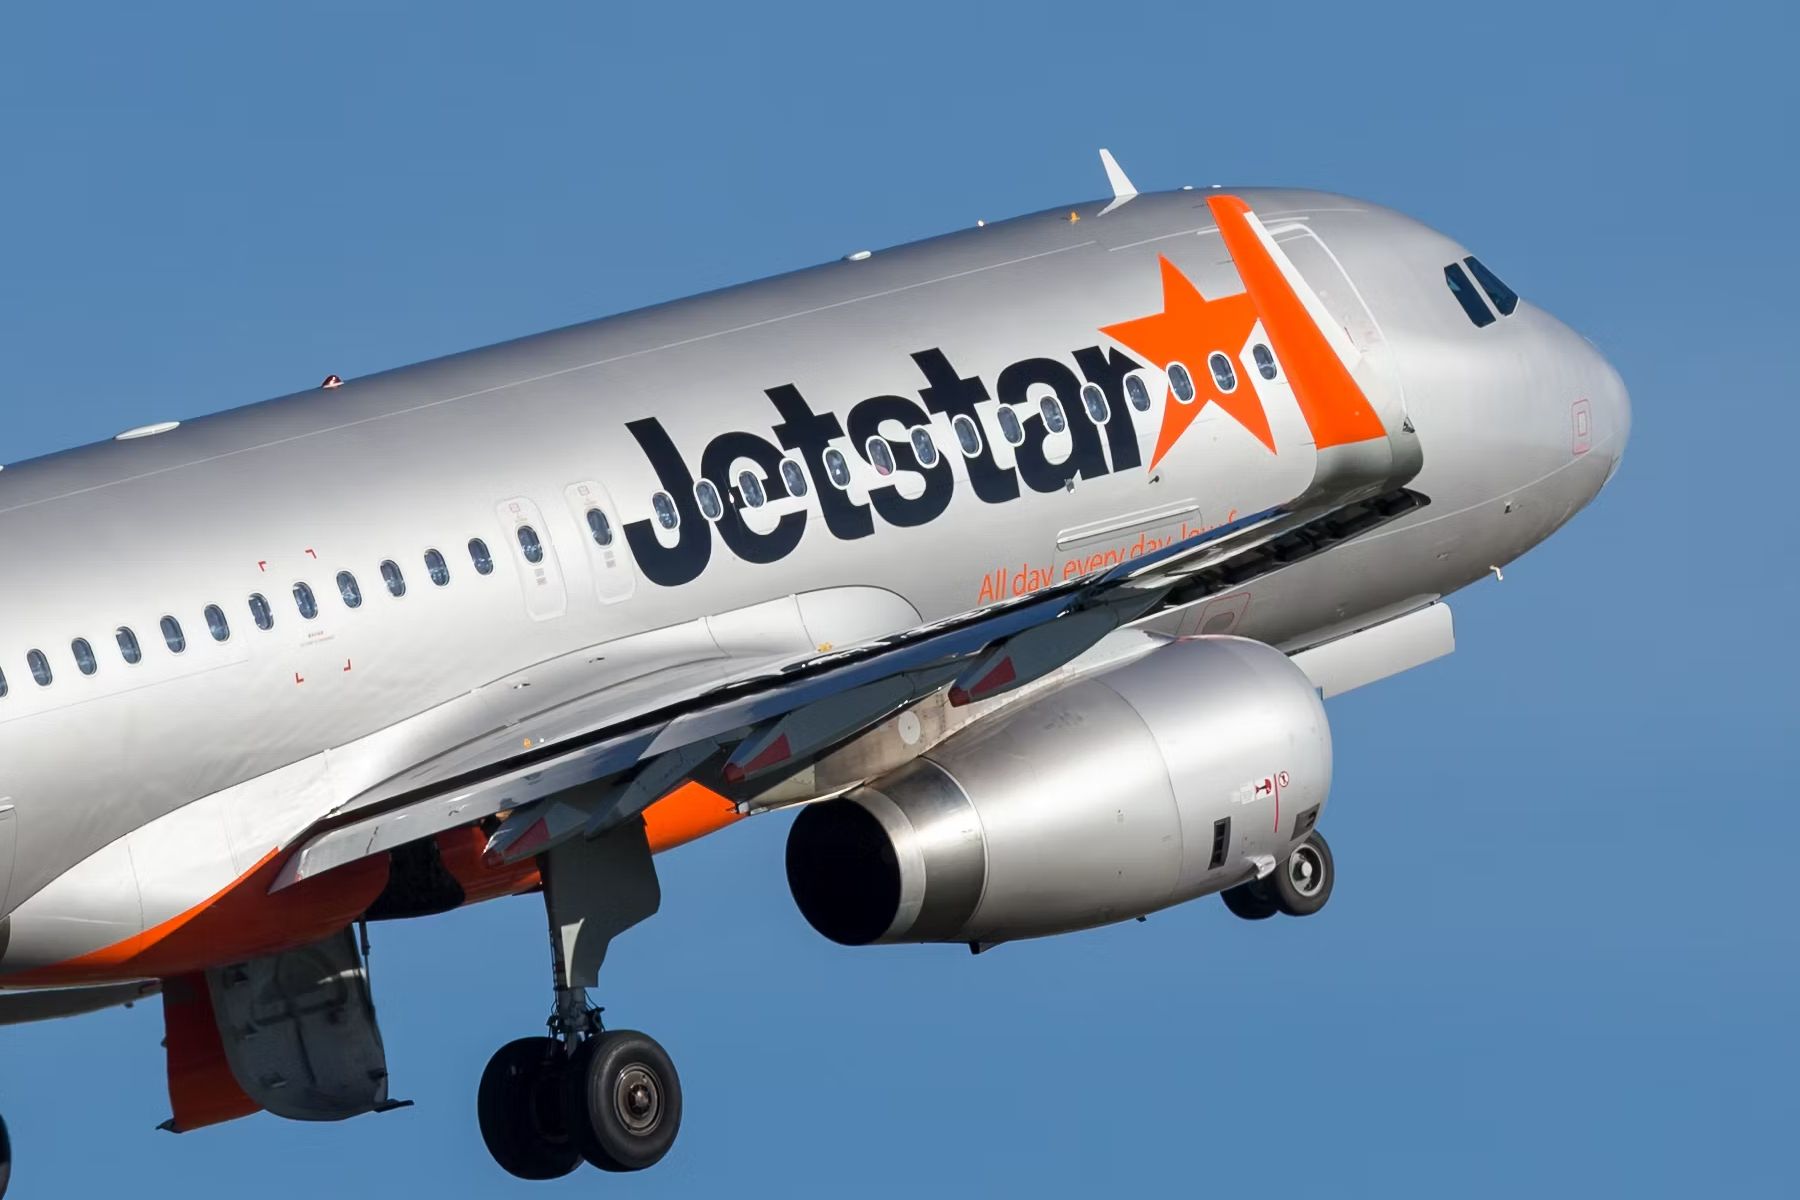 A Jetstar Airbus A321 flying in the sky.